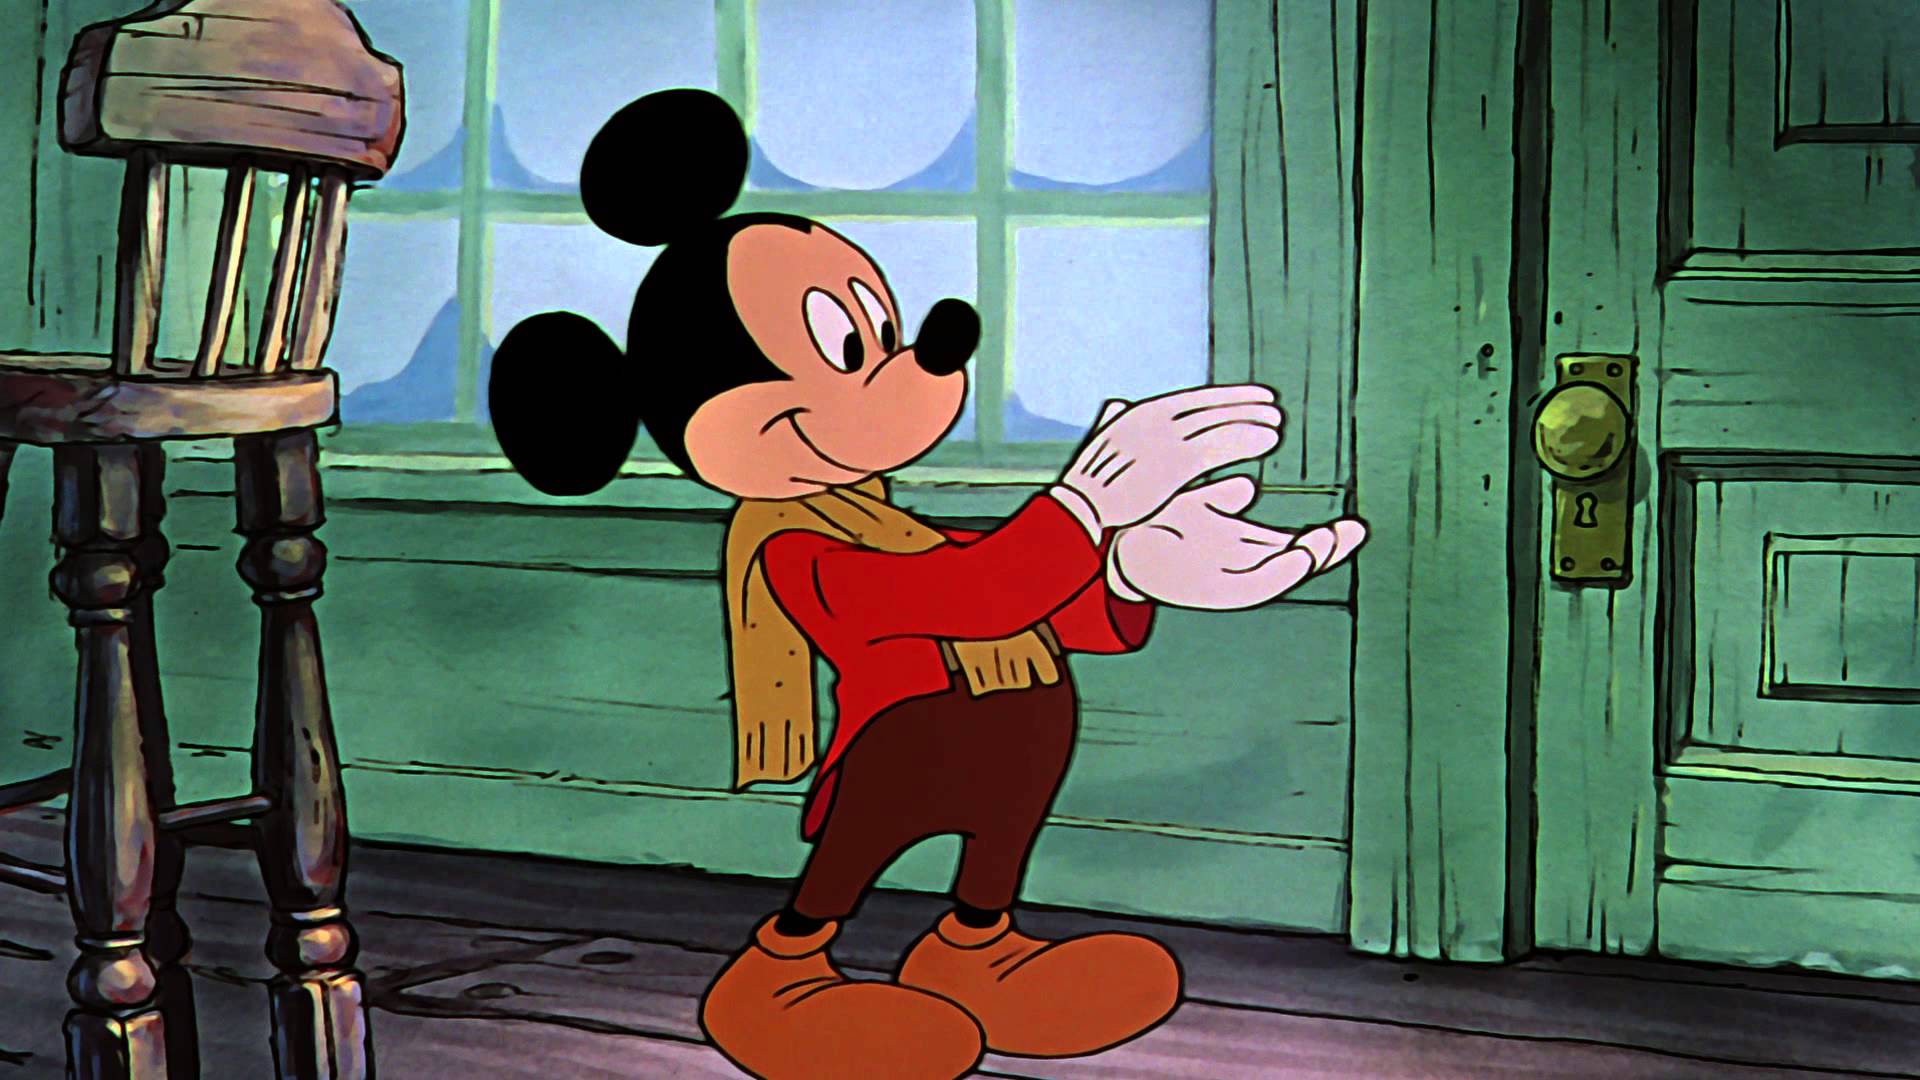 Mickey's Christmas Carol Backgrounds, Compatible - PC, Mobile, Gadgets| 1920x1080 px